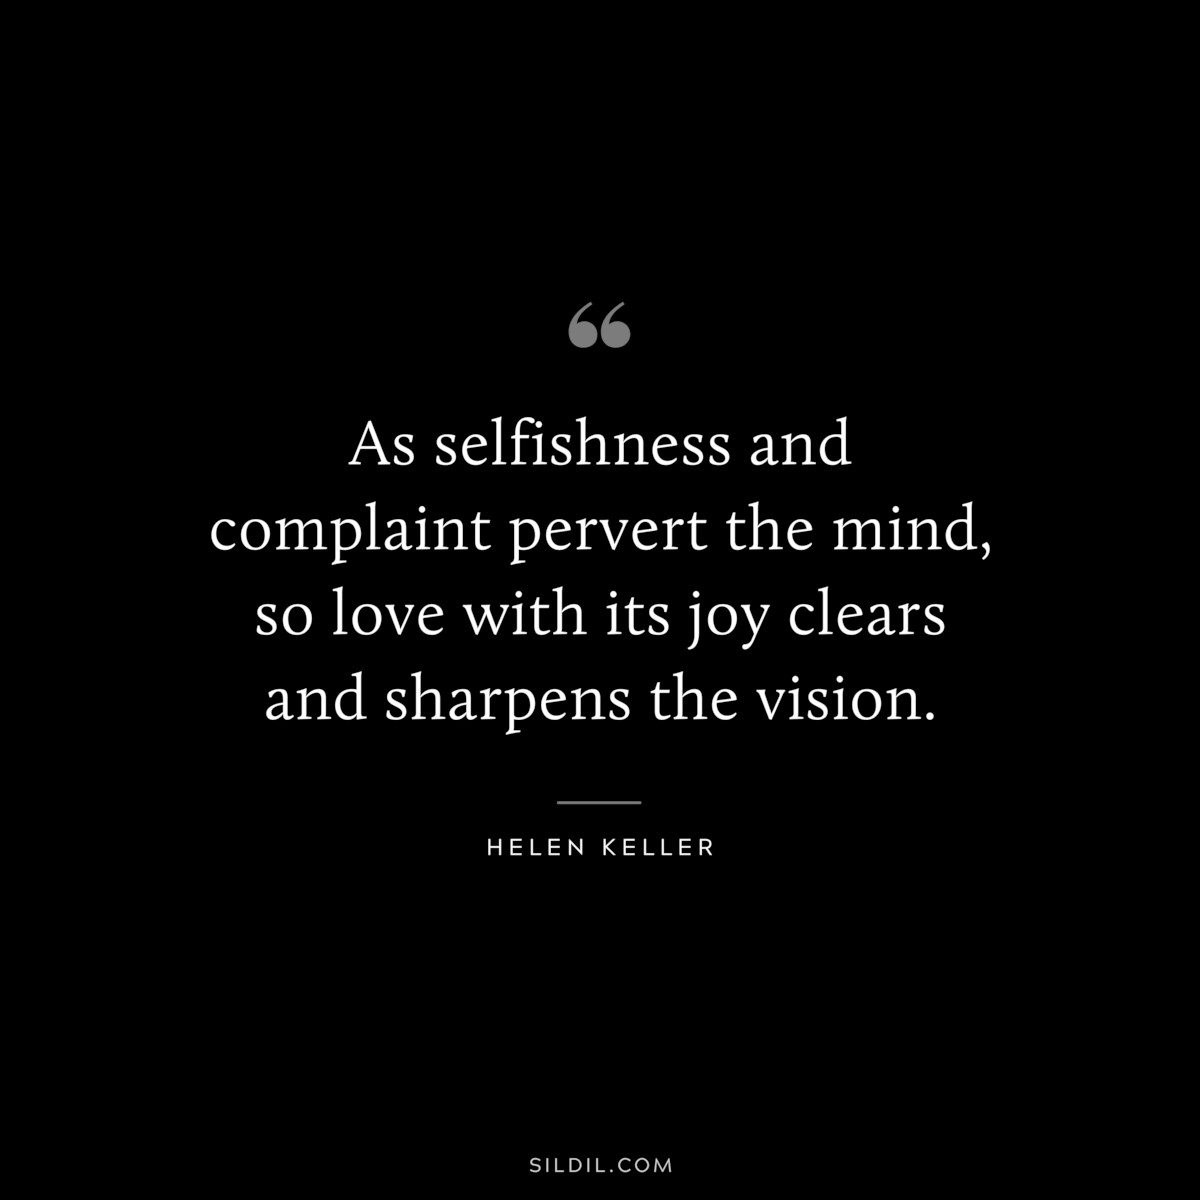 As selfishness and complaint pervert the mind, so love with its joy clears and sharpens the vision. ― Helen Keller